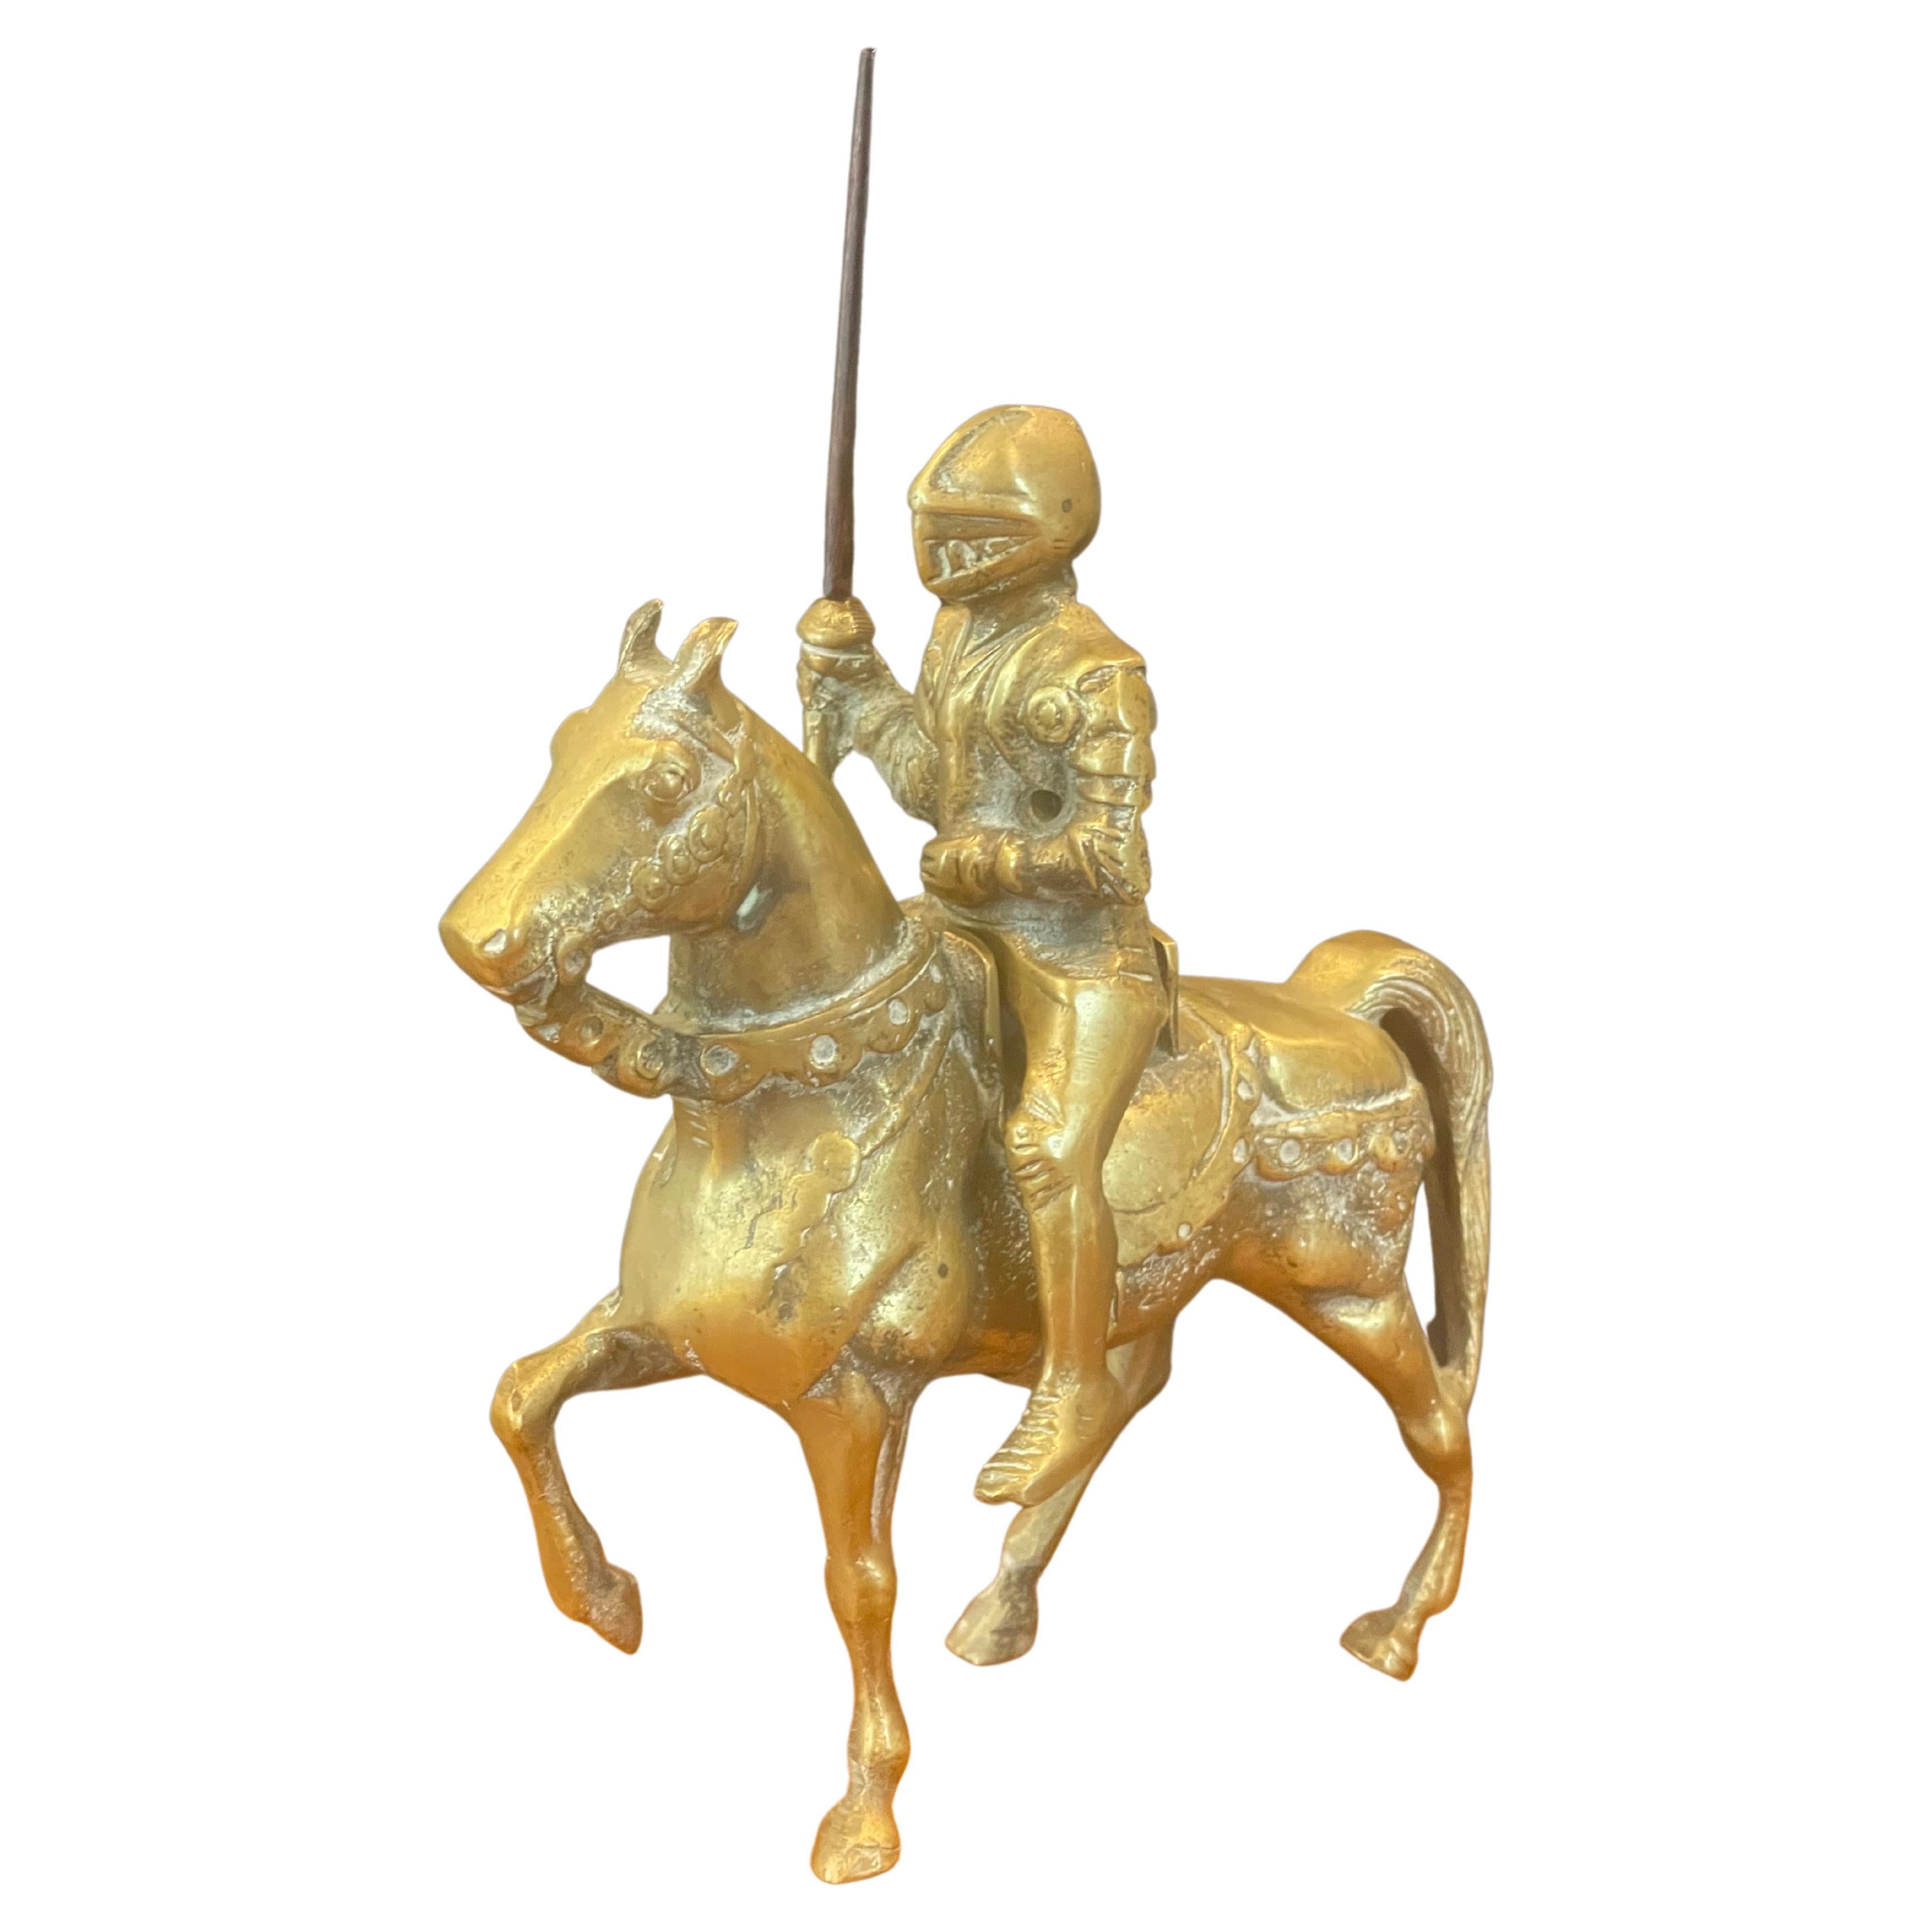 A very cool and well detailed solid cast brass medieval armored knight on horse sculpture, circa 1970s. The piece is in very good vintage condition and measures 7.25